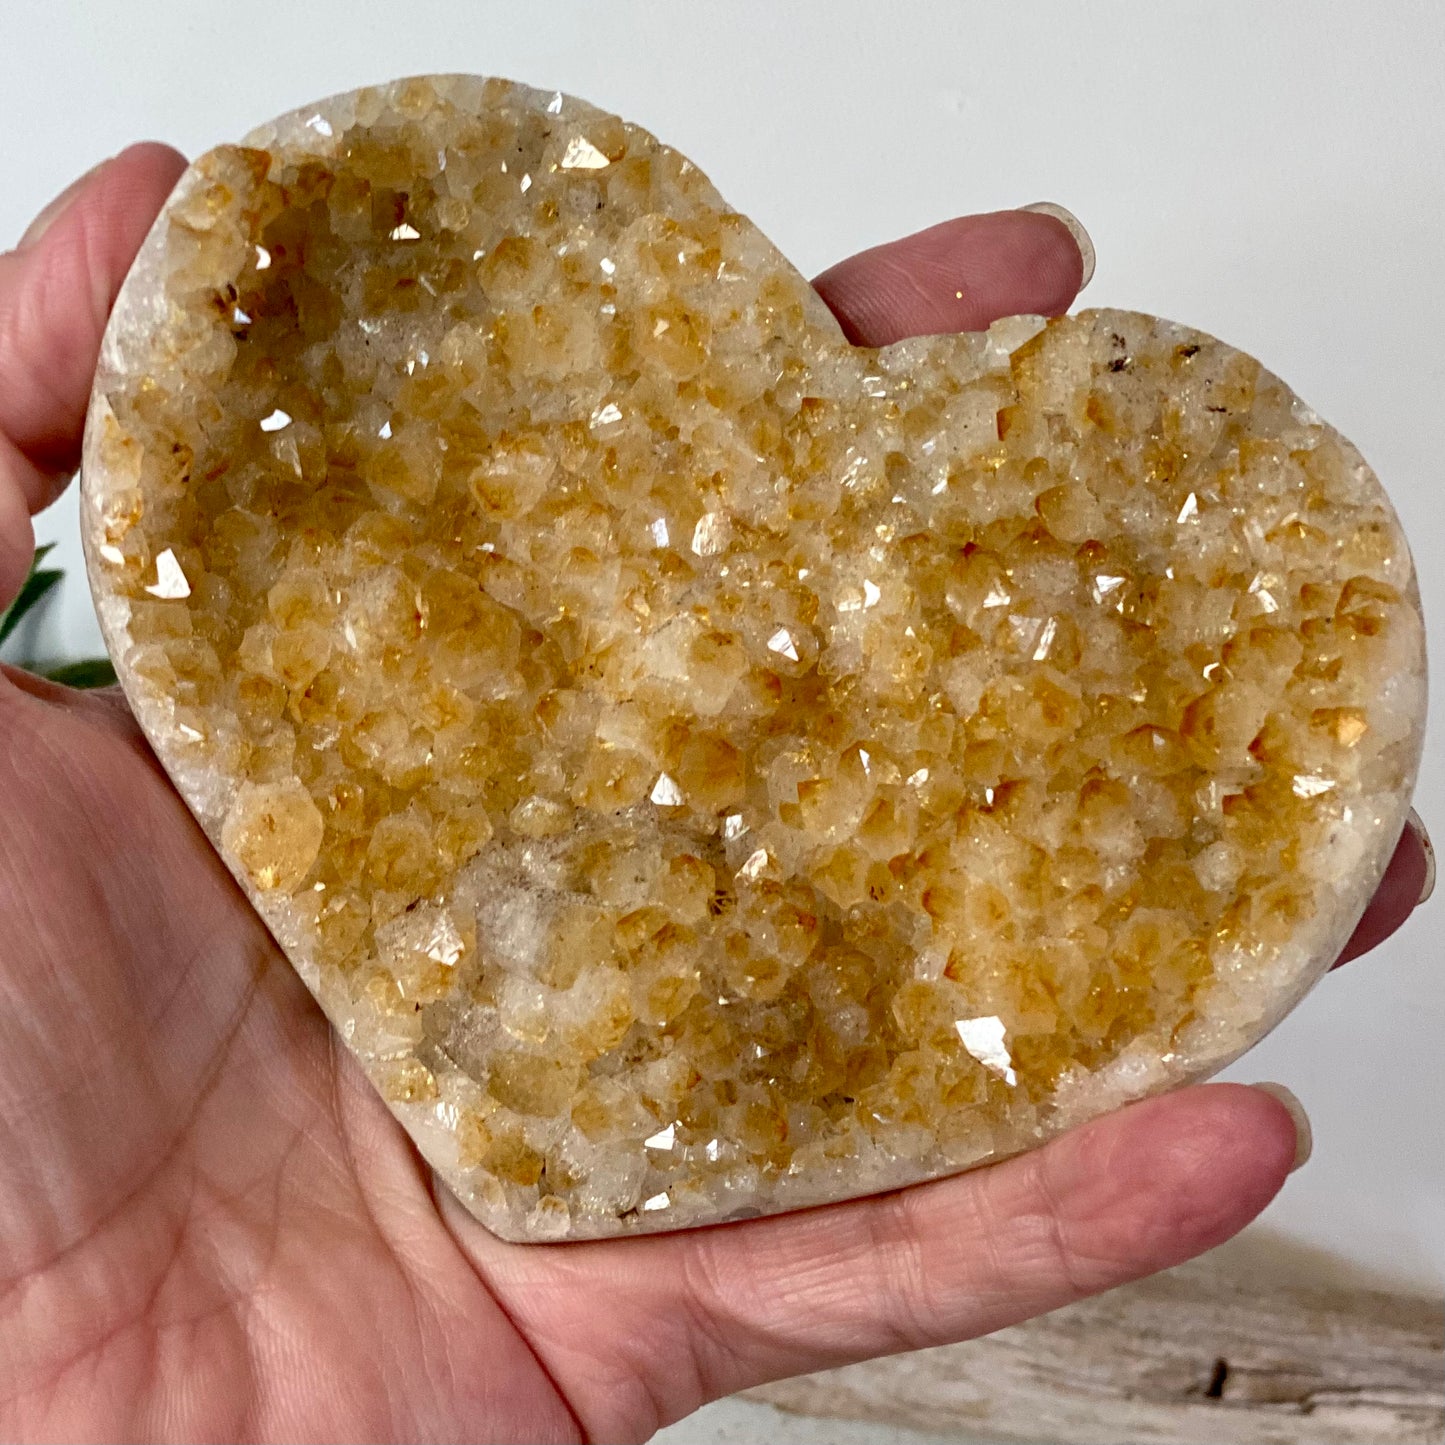 Citrine Druzy Heart with Stand: Radiant Warmth for Any Season